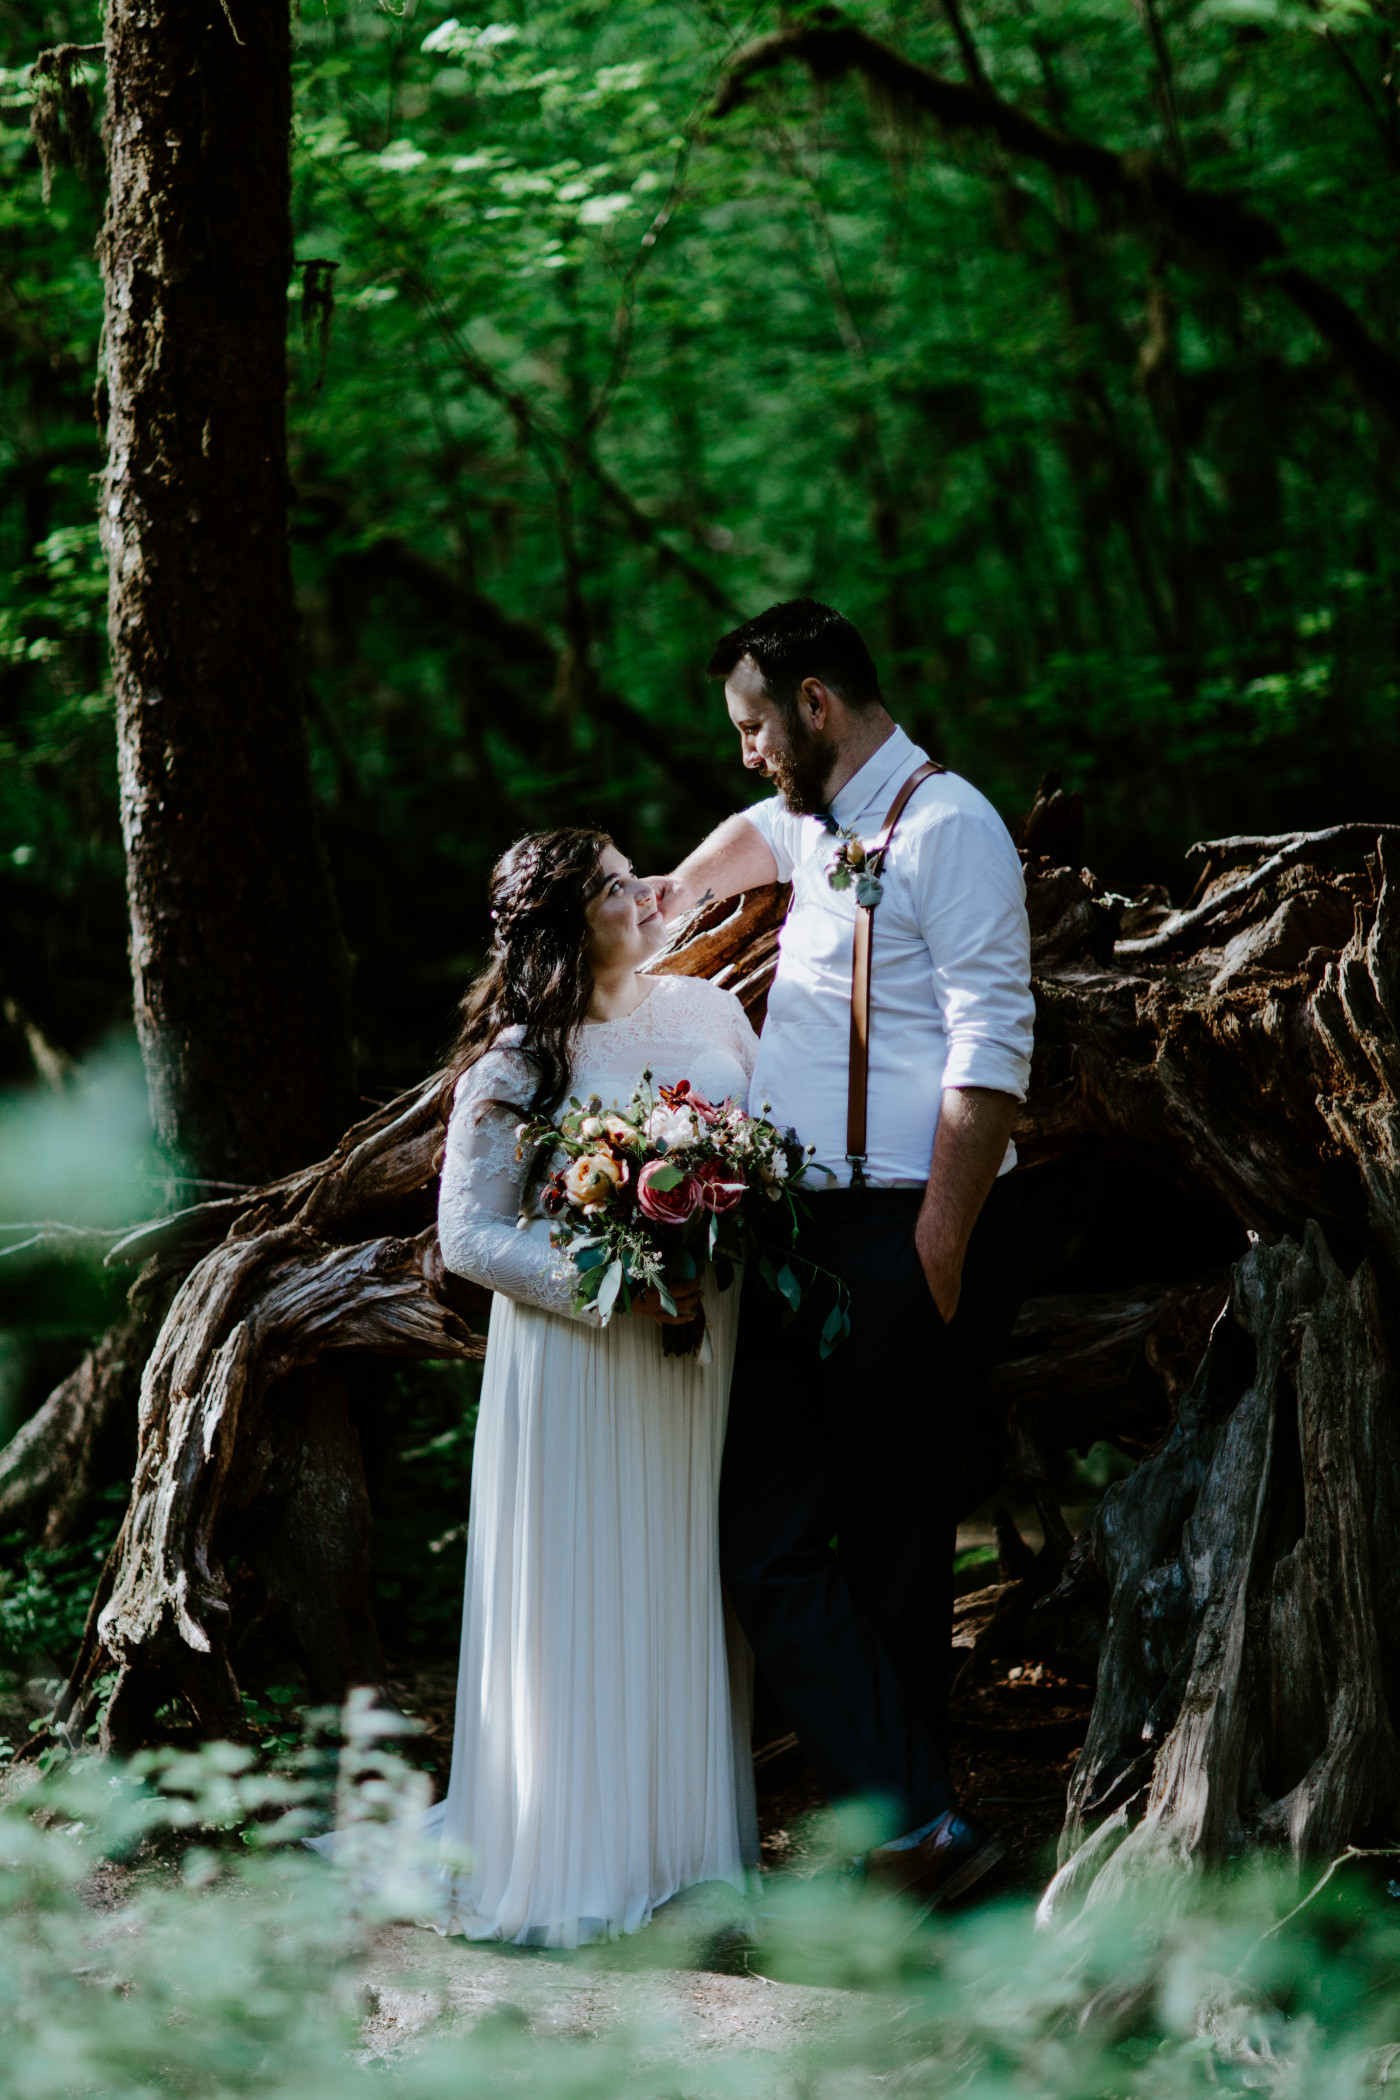 Jack and Brooke admire each other. Elopement photography at Olympic National Park by Sienna Plus Josh.